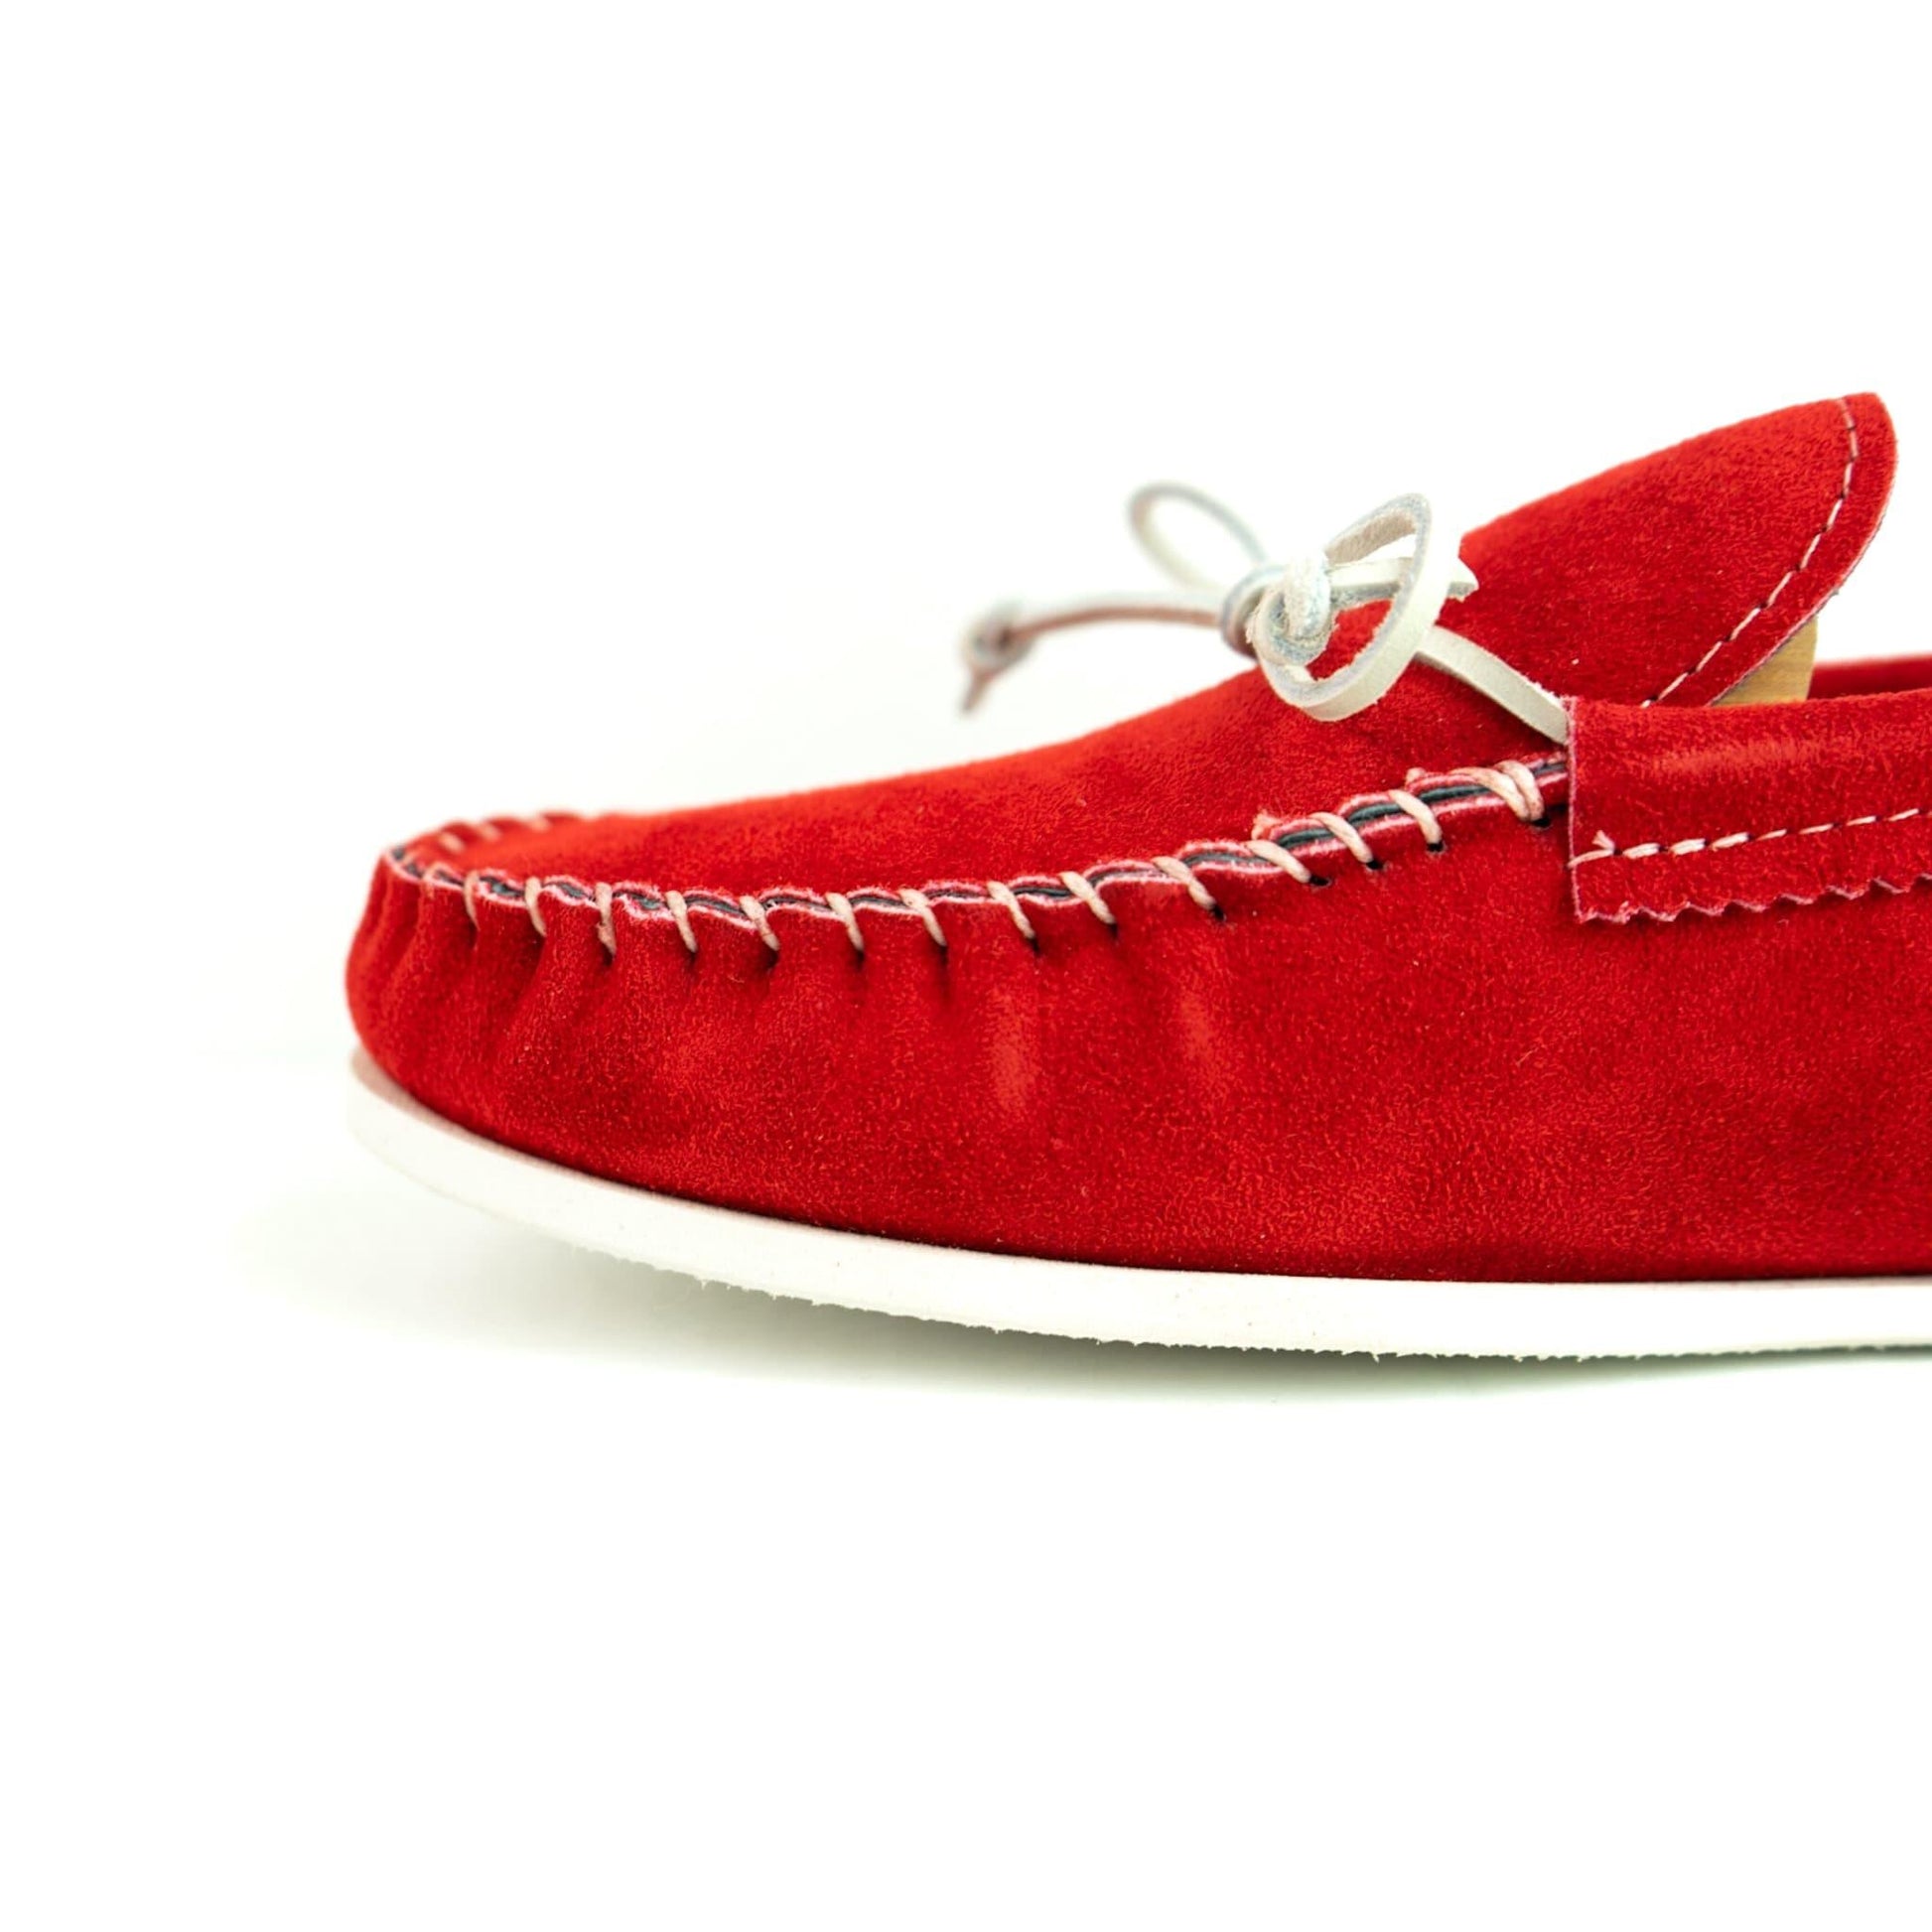 Spring Grove USA Moccasins - Red Suede - Kicks For Gents - Shoes - MADE IN USA, Sneaker